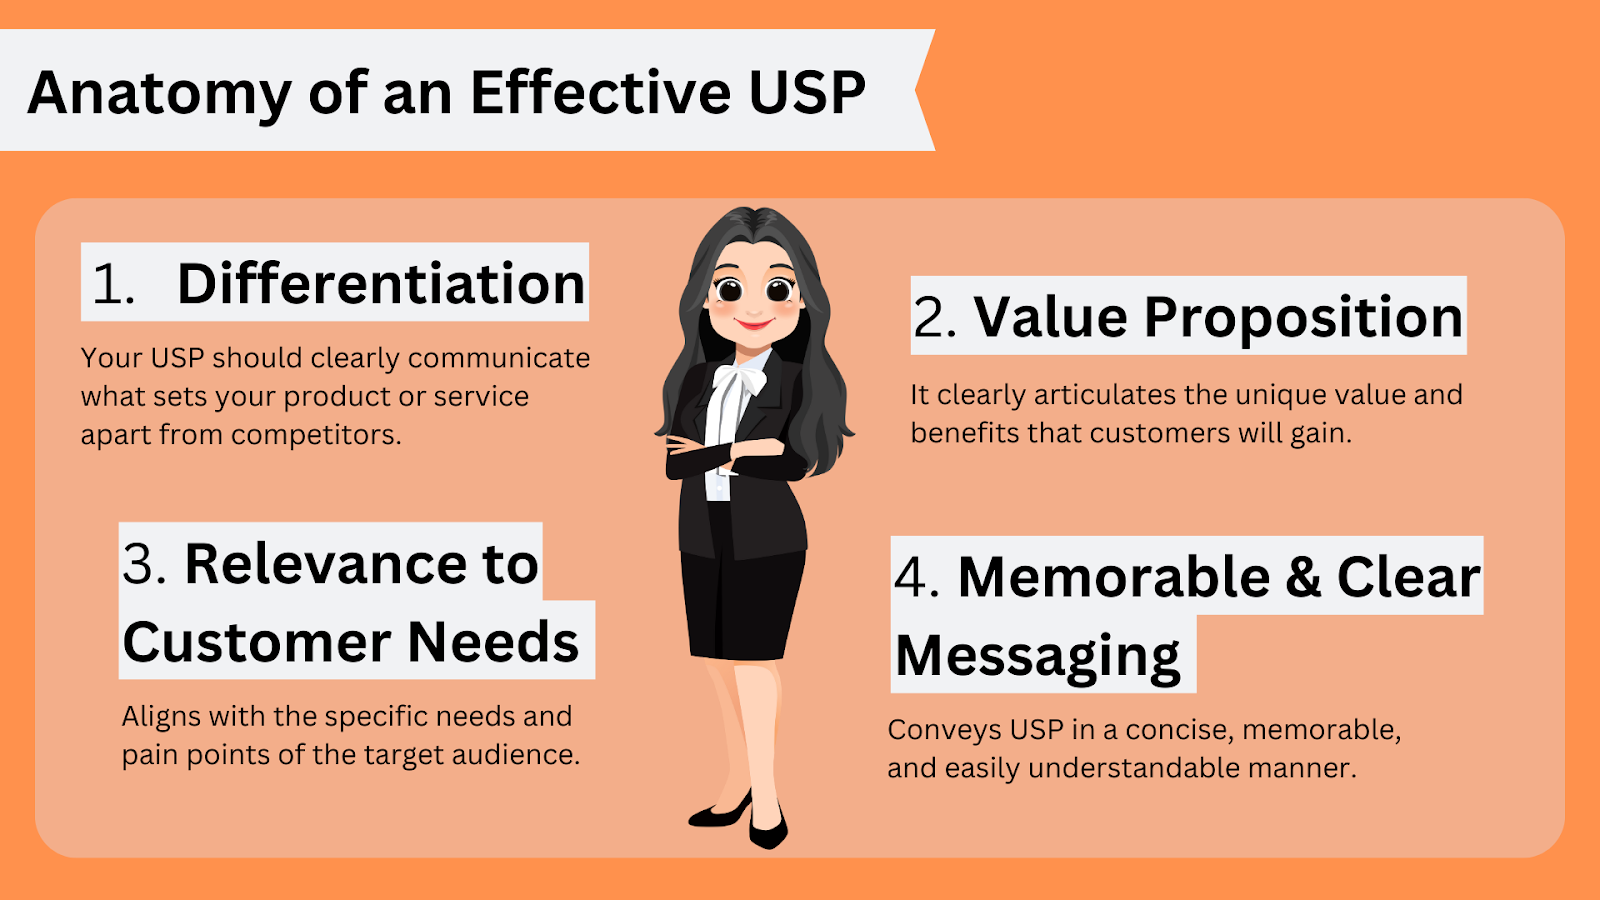 Step 3 of crafting your winning SaaS product launch marketing plan - define your value proposition. The 4 parts of the anatomy of an effective USP (unique selling proposition) are: differentiation, value proposition, relevance to customer needs, and memorable & clear messaging. Don't miss the other 10 steps in the full guide.